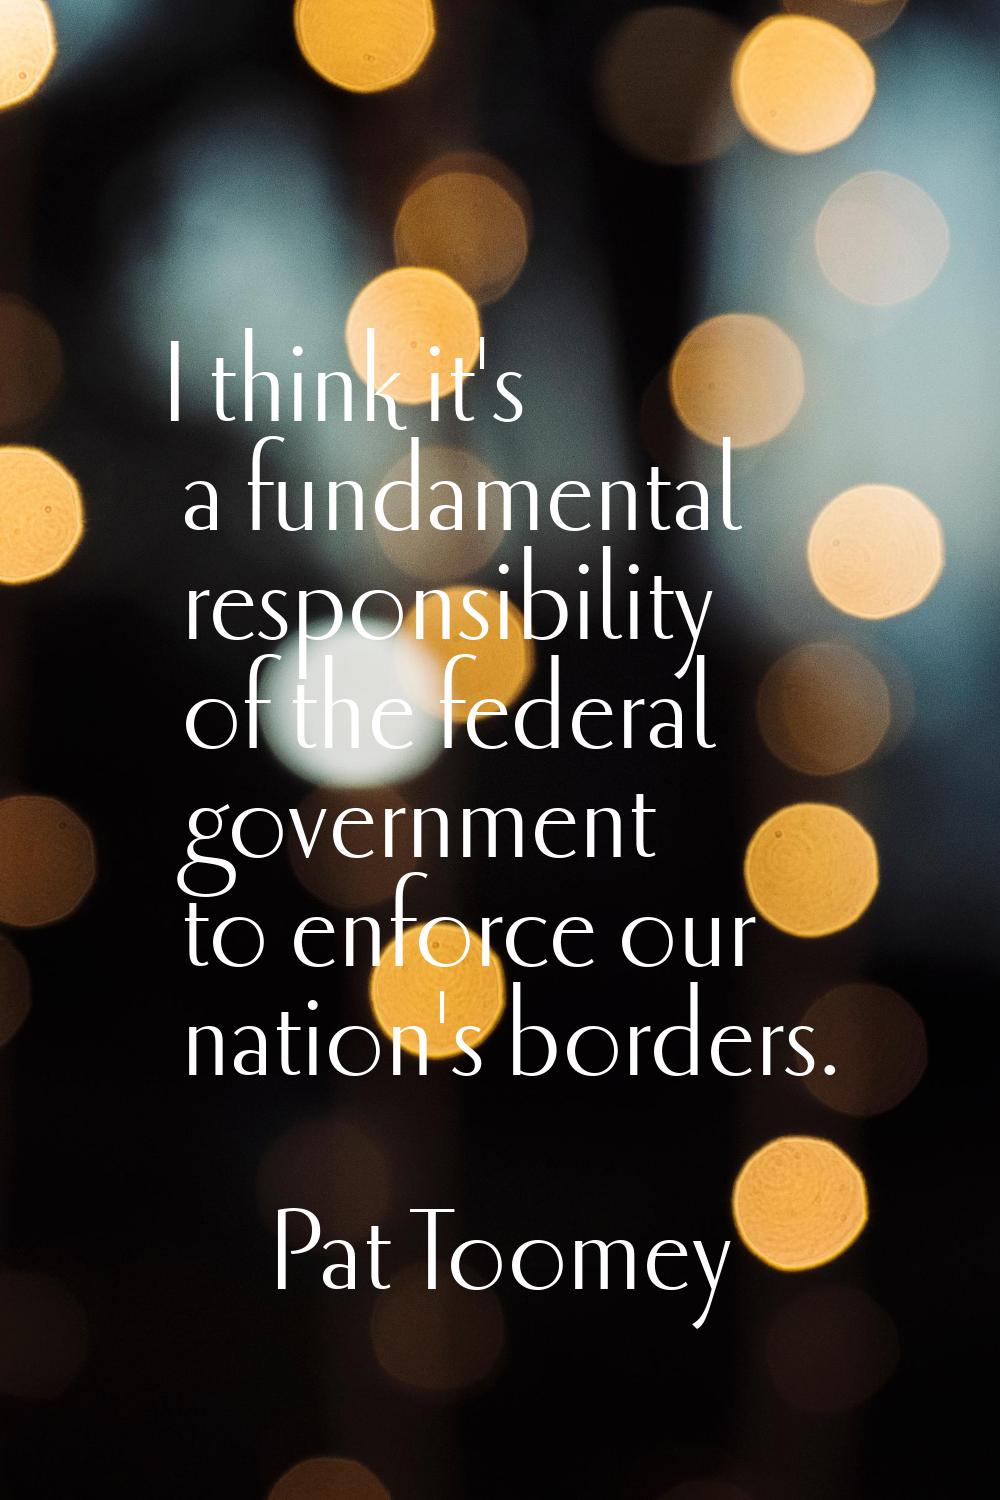 I think it's a fundamental responsibility of the federal government to enforce our nation's borders